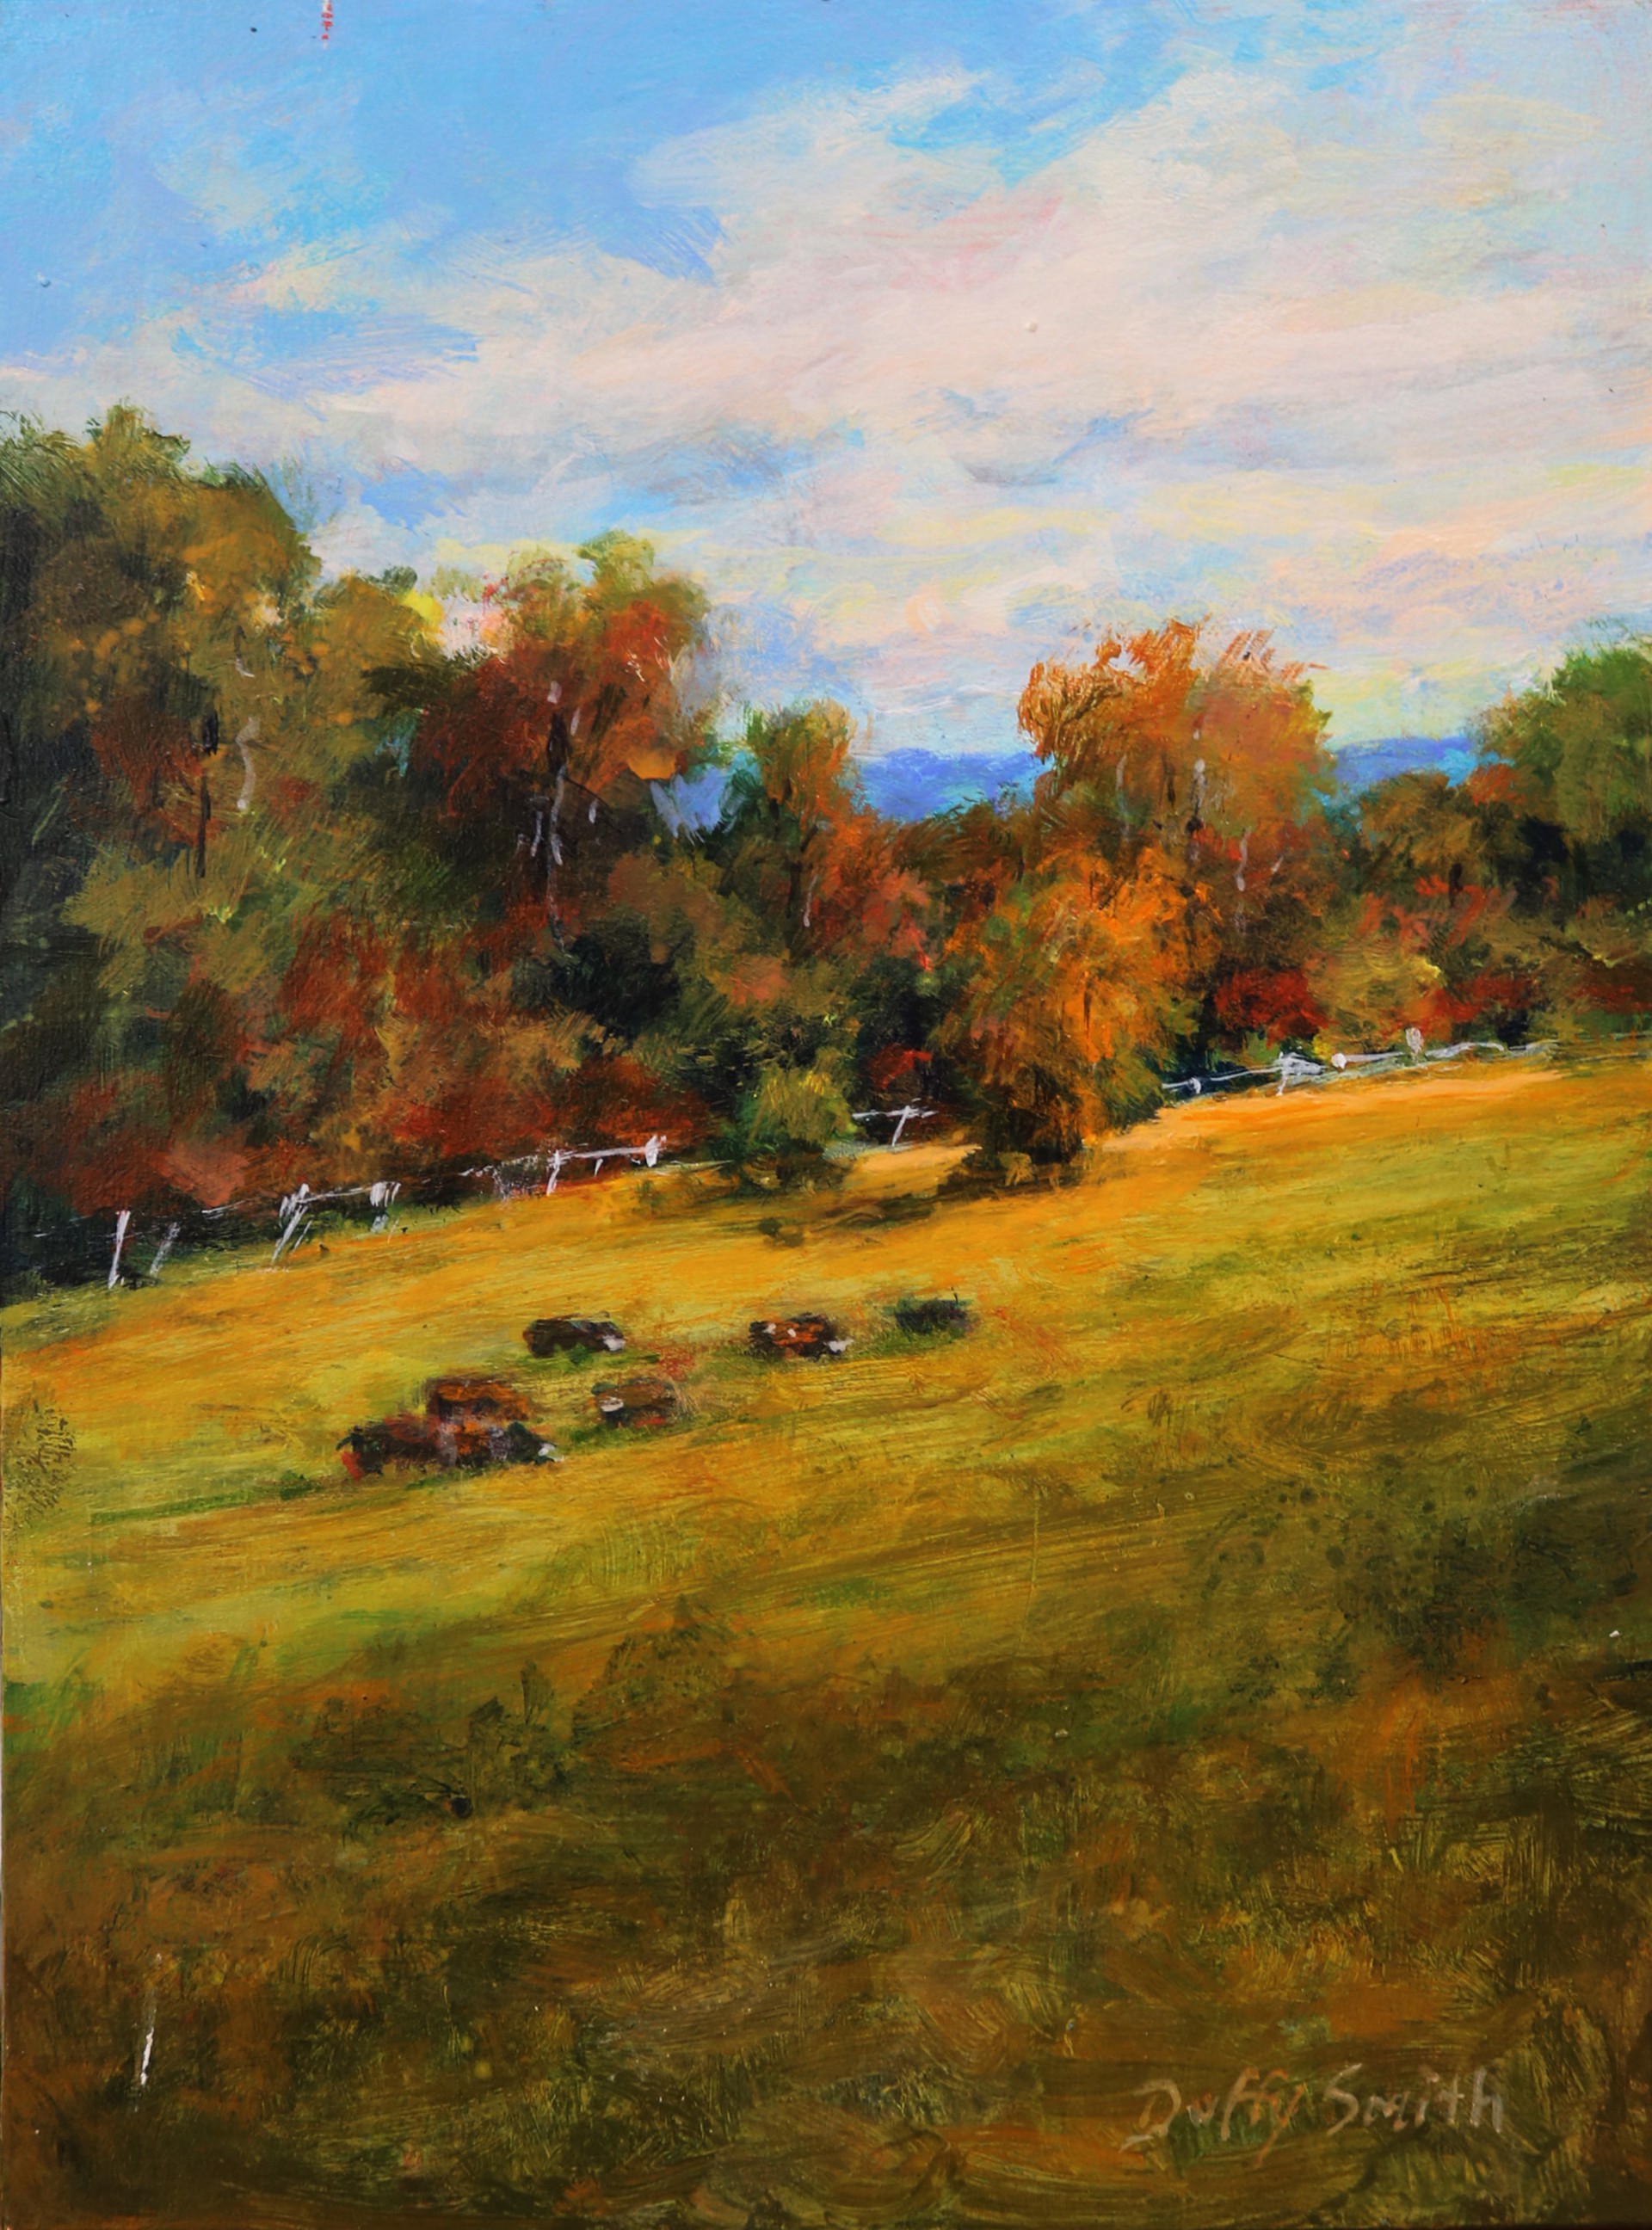 Afternoon Grazing by Shaunna Duffy Smith